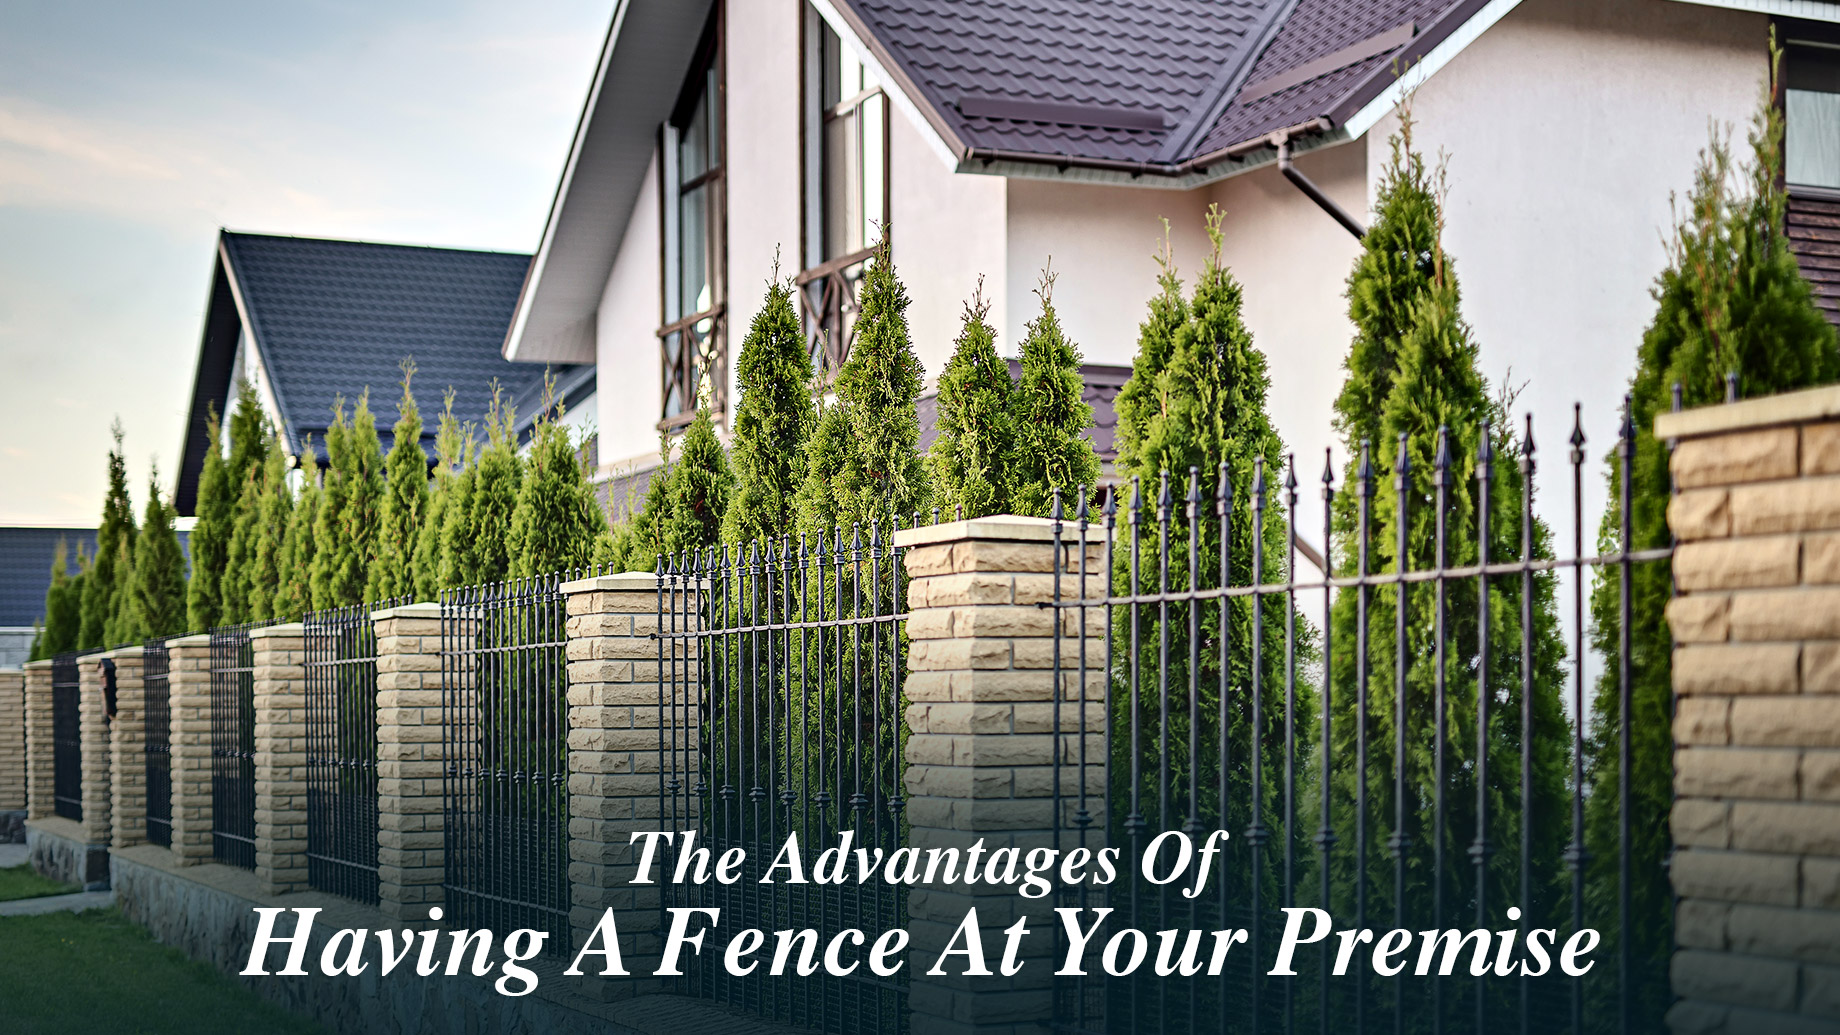 The Advantages Of Having A Fence At Your Premise